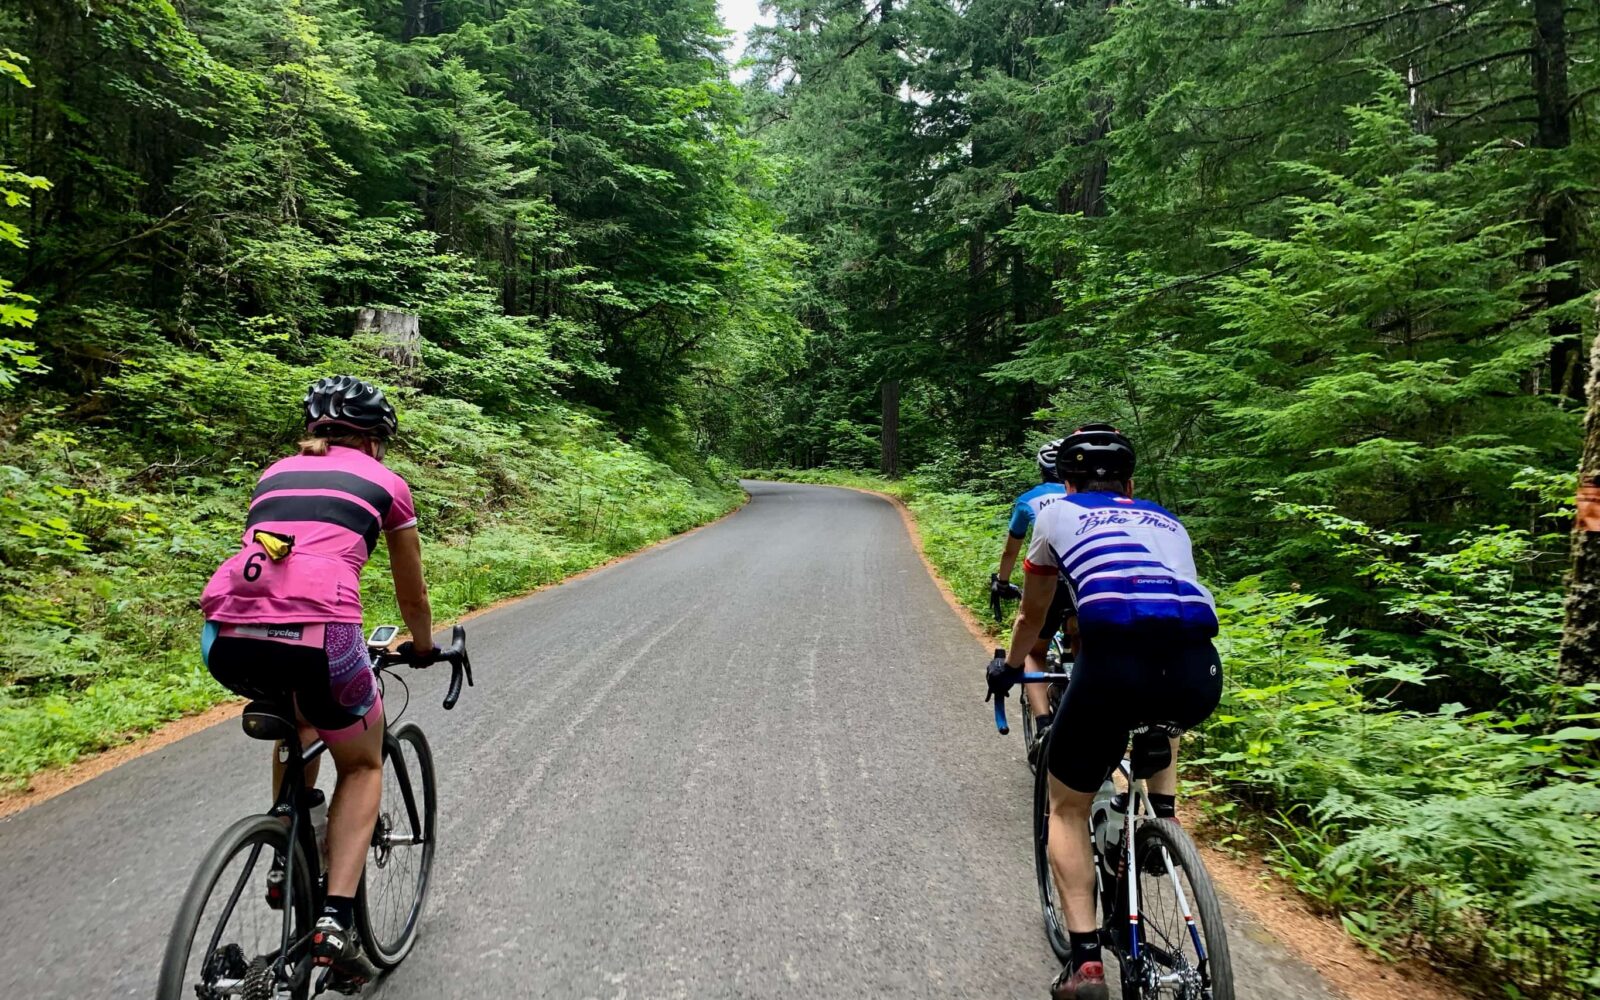 Two cyclists on paved forest service roads near Panther Creek campground in Washington state.